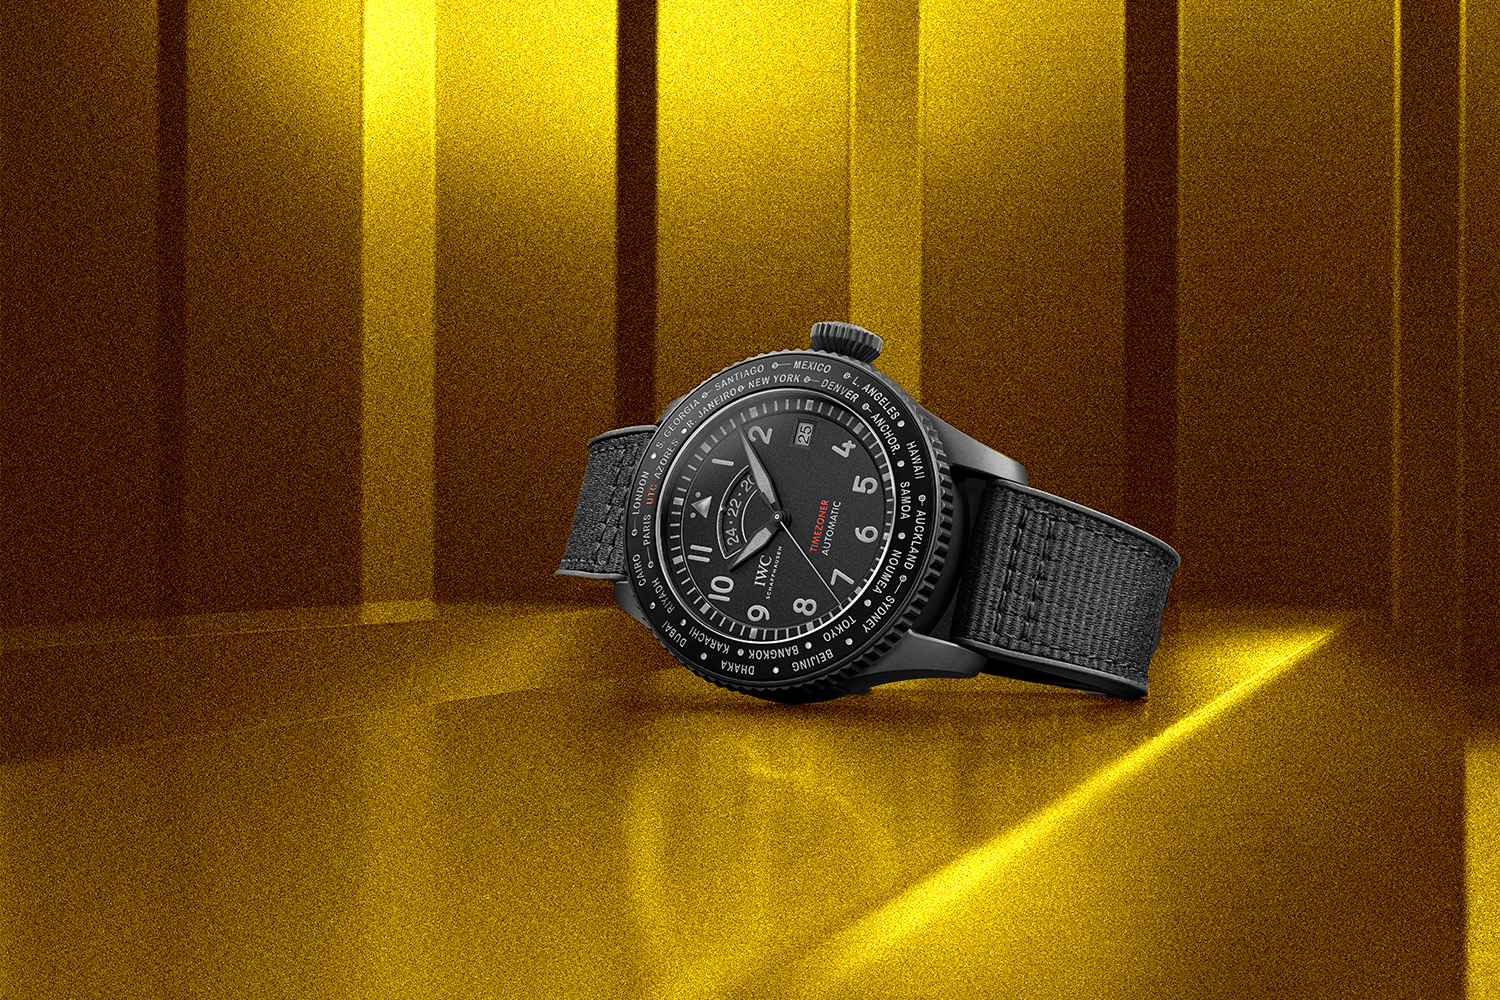 Special Ops: IWC Schaffhausen Unveils Two Very High-Tech Ceramic Watches